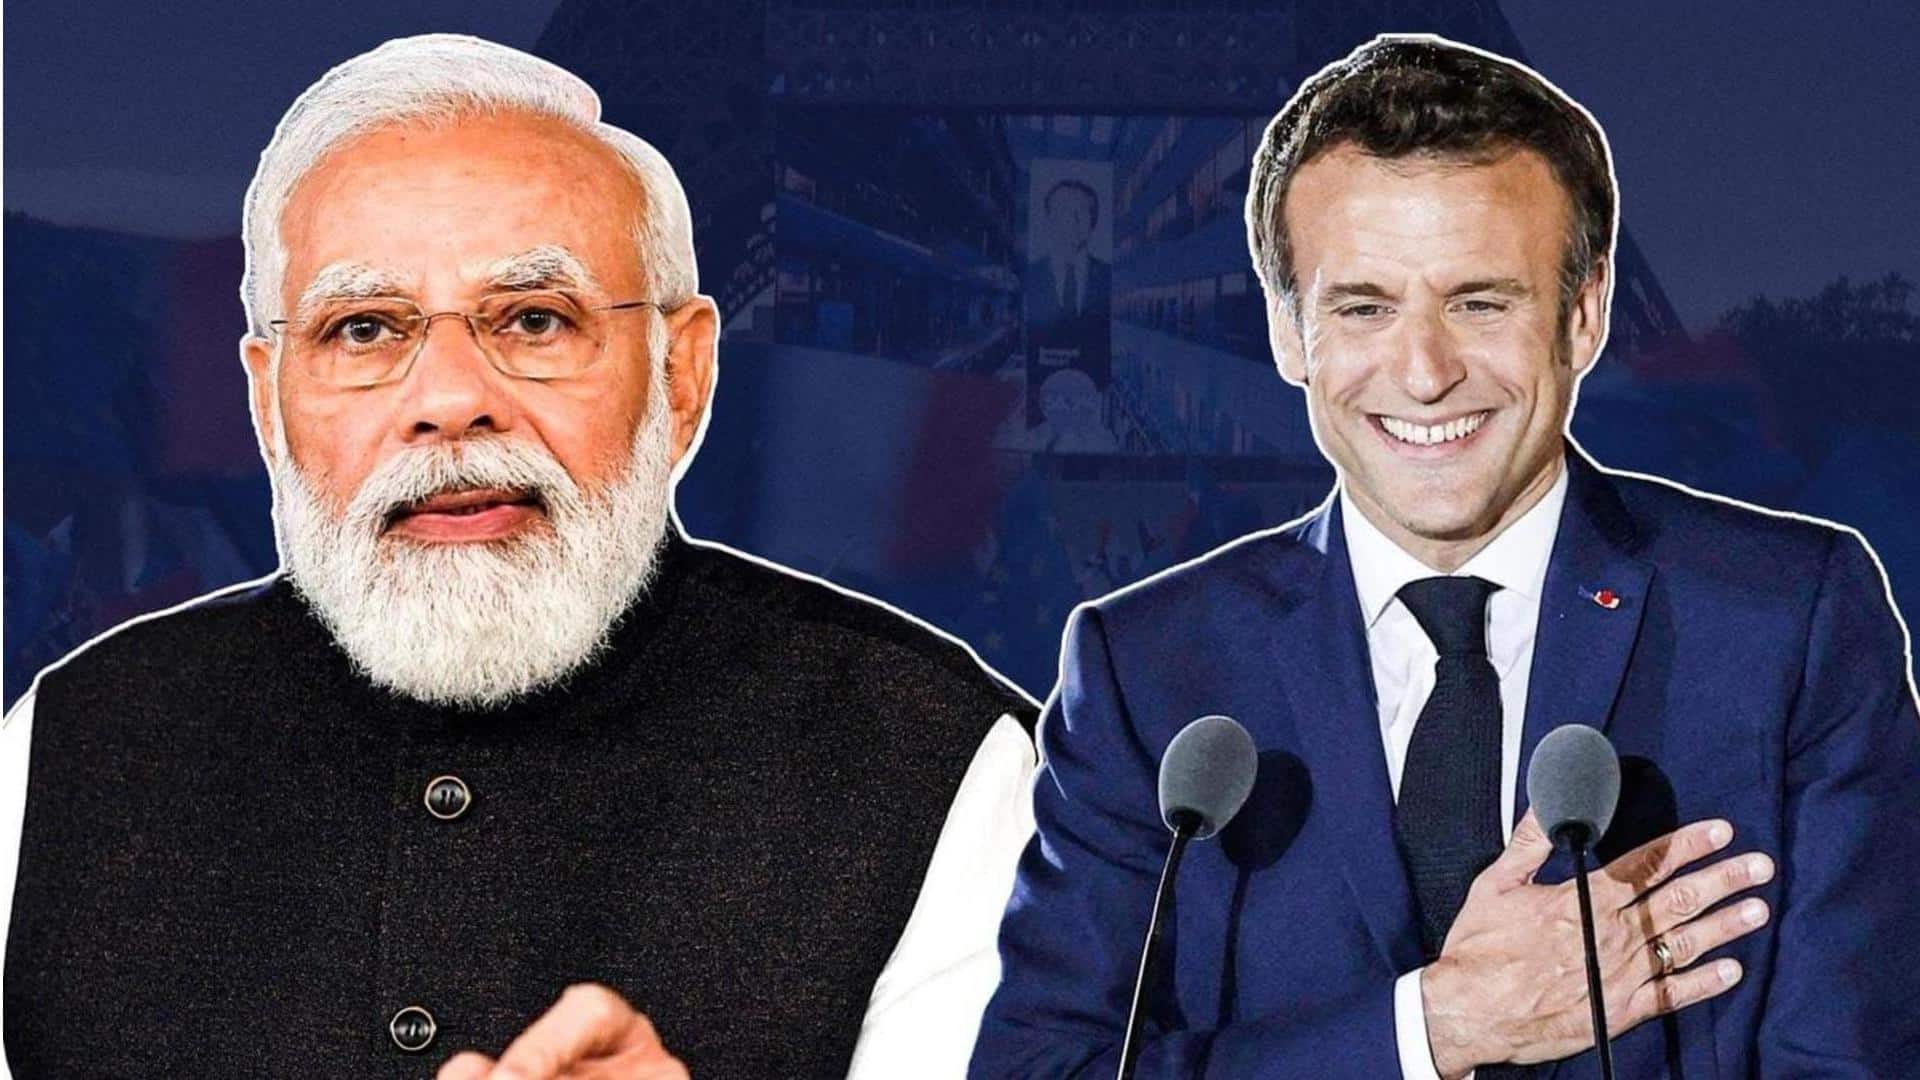 PM Modi embarks on 2-day visit to France